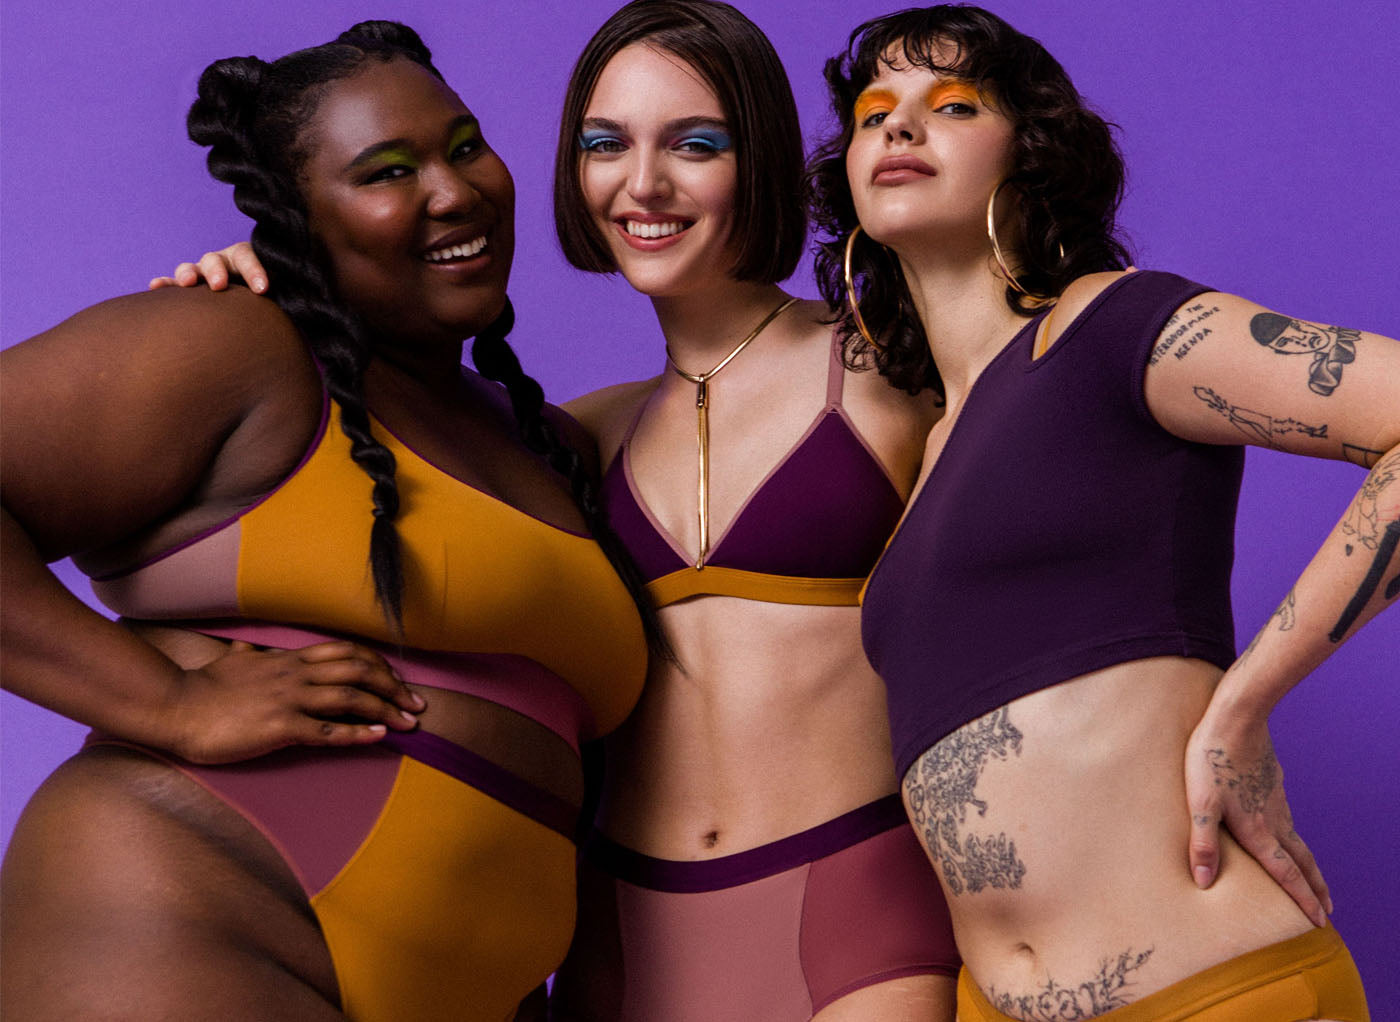 parade's new bras have a bra-hater's approval 👍🏻 check out their